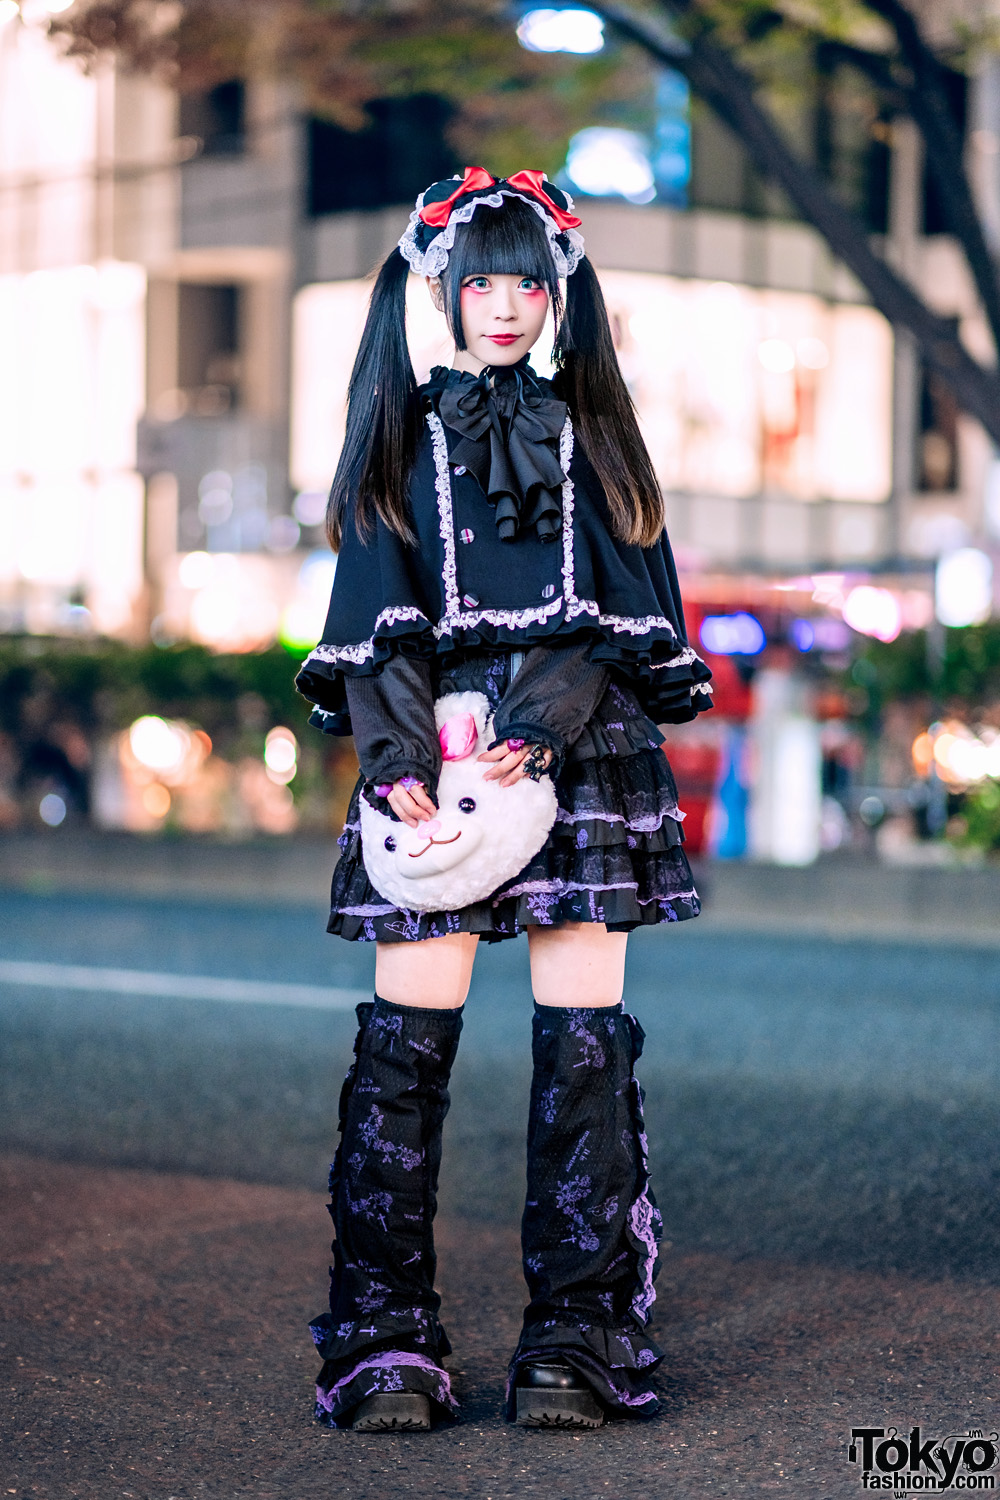 Catching our attention on the Harajuku street one evening was Yukachin spor...